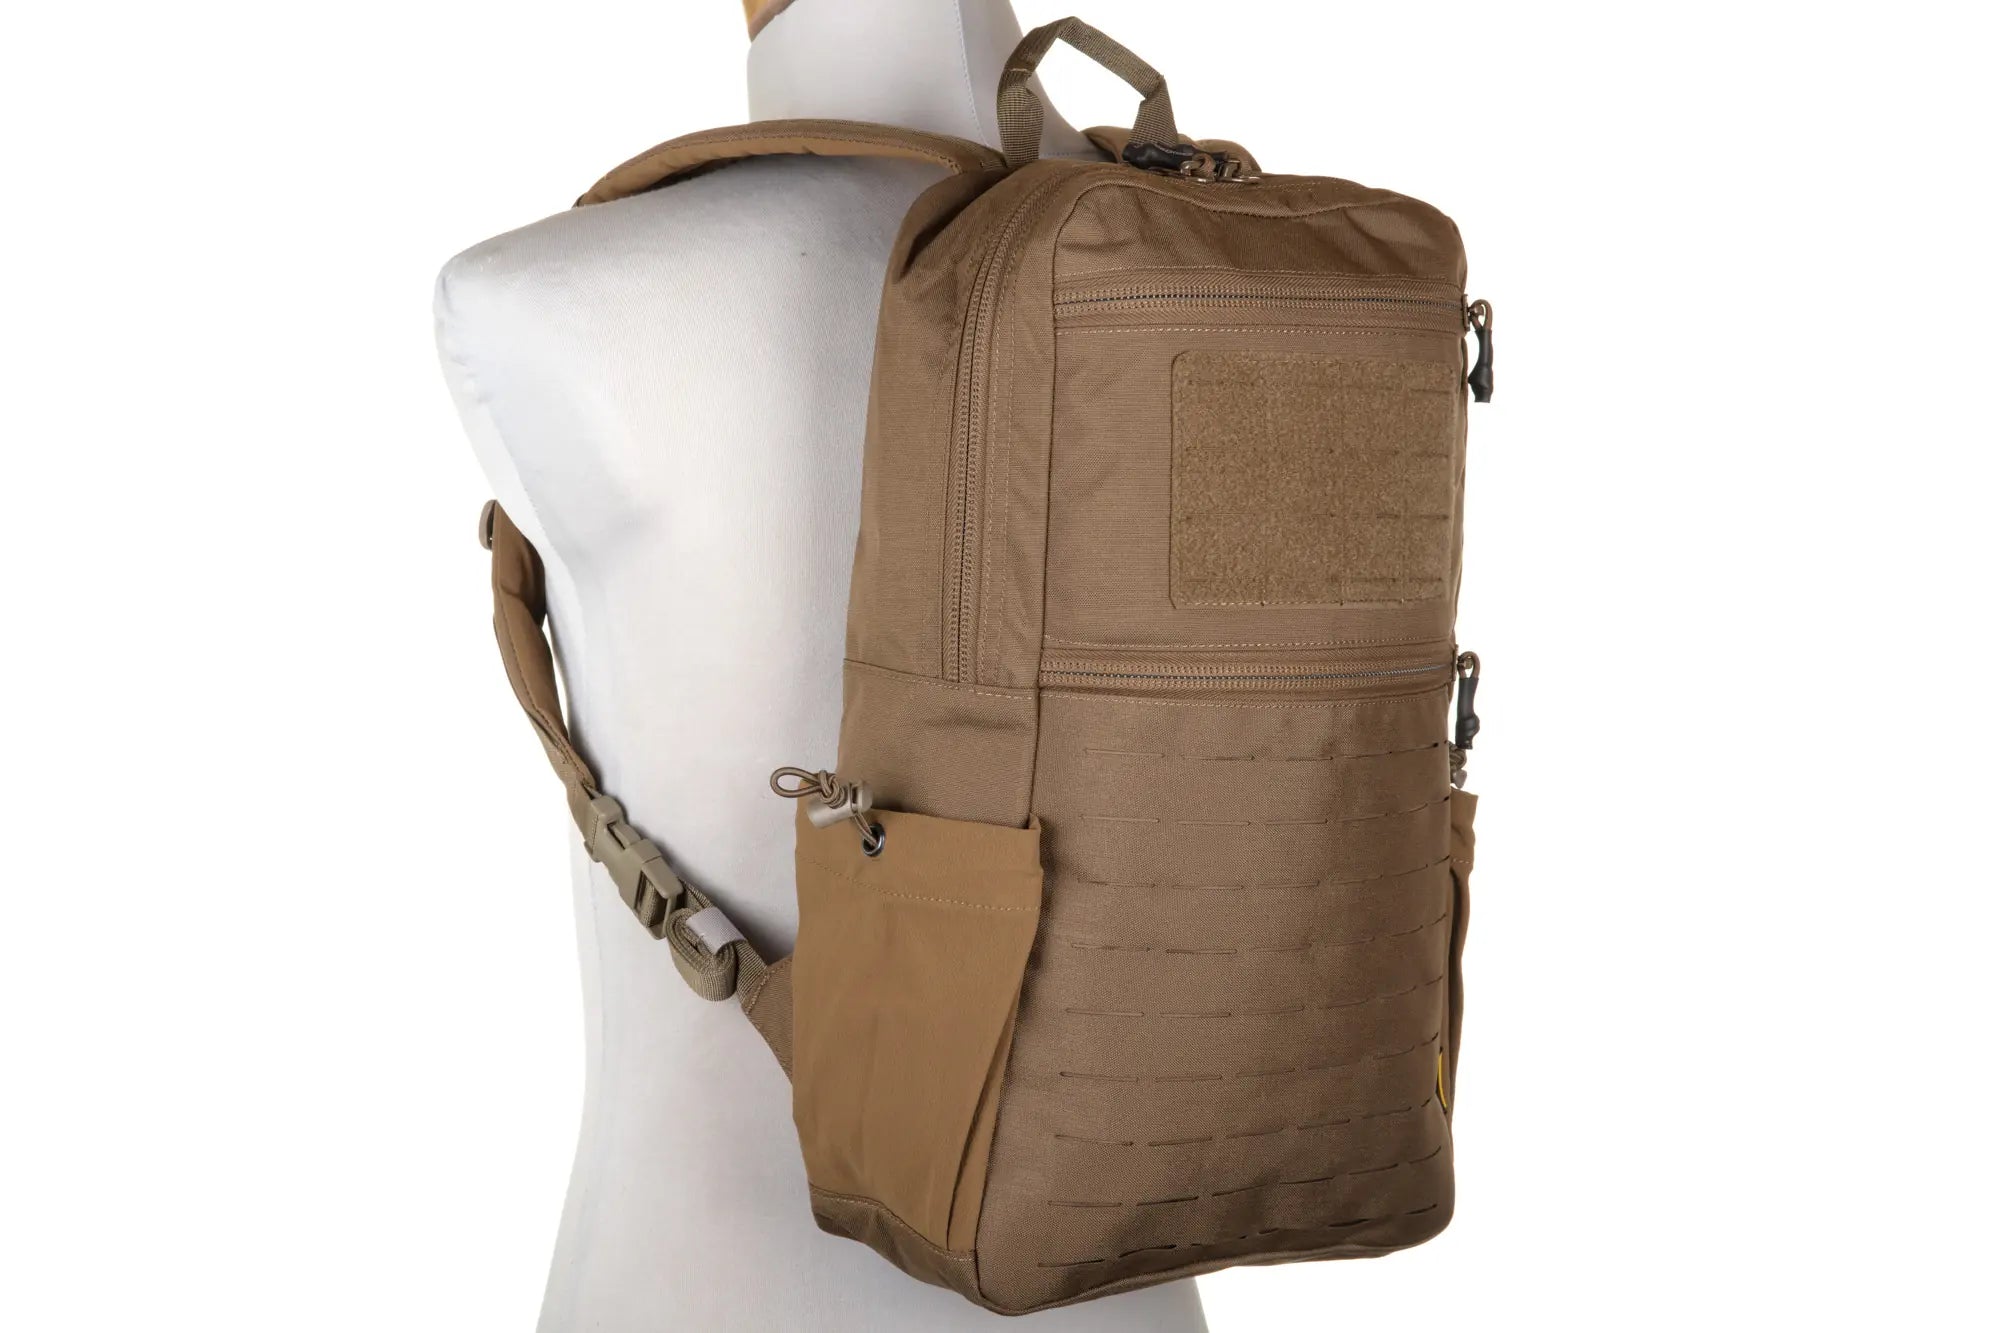 Emerson Gear Commuter 14L Backpack Coyote Brown